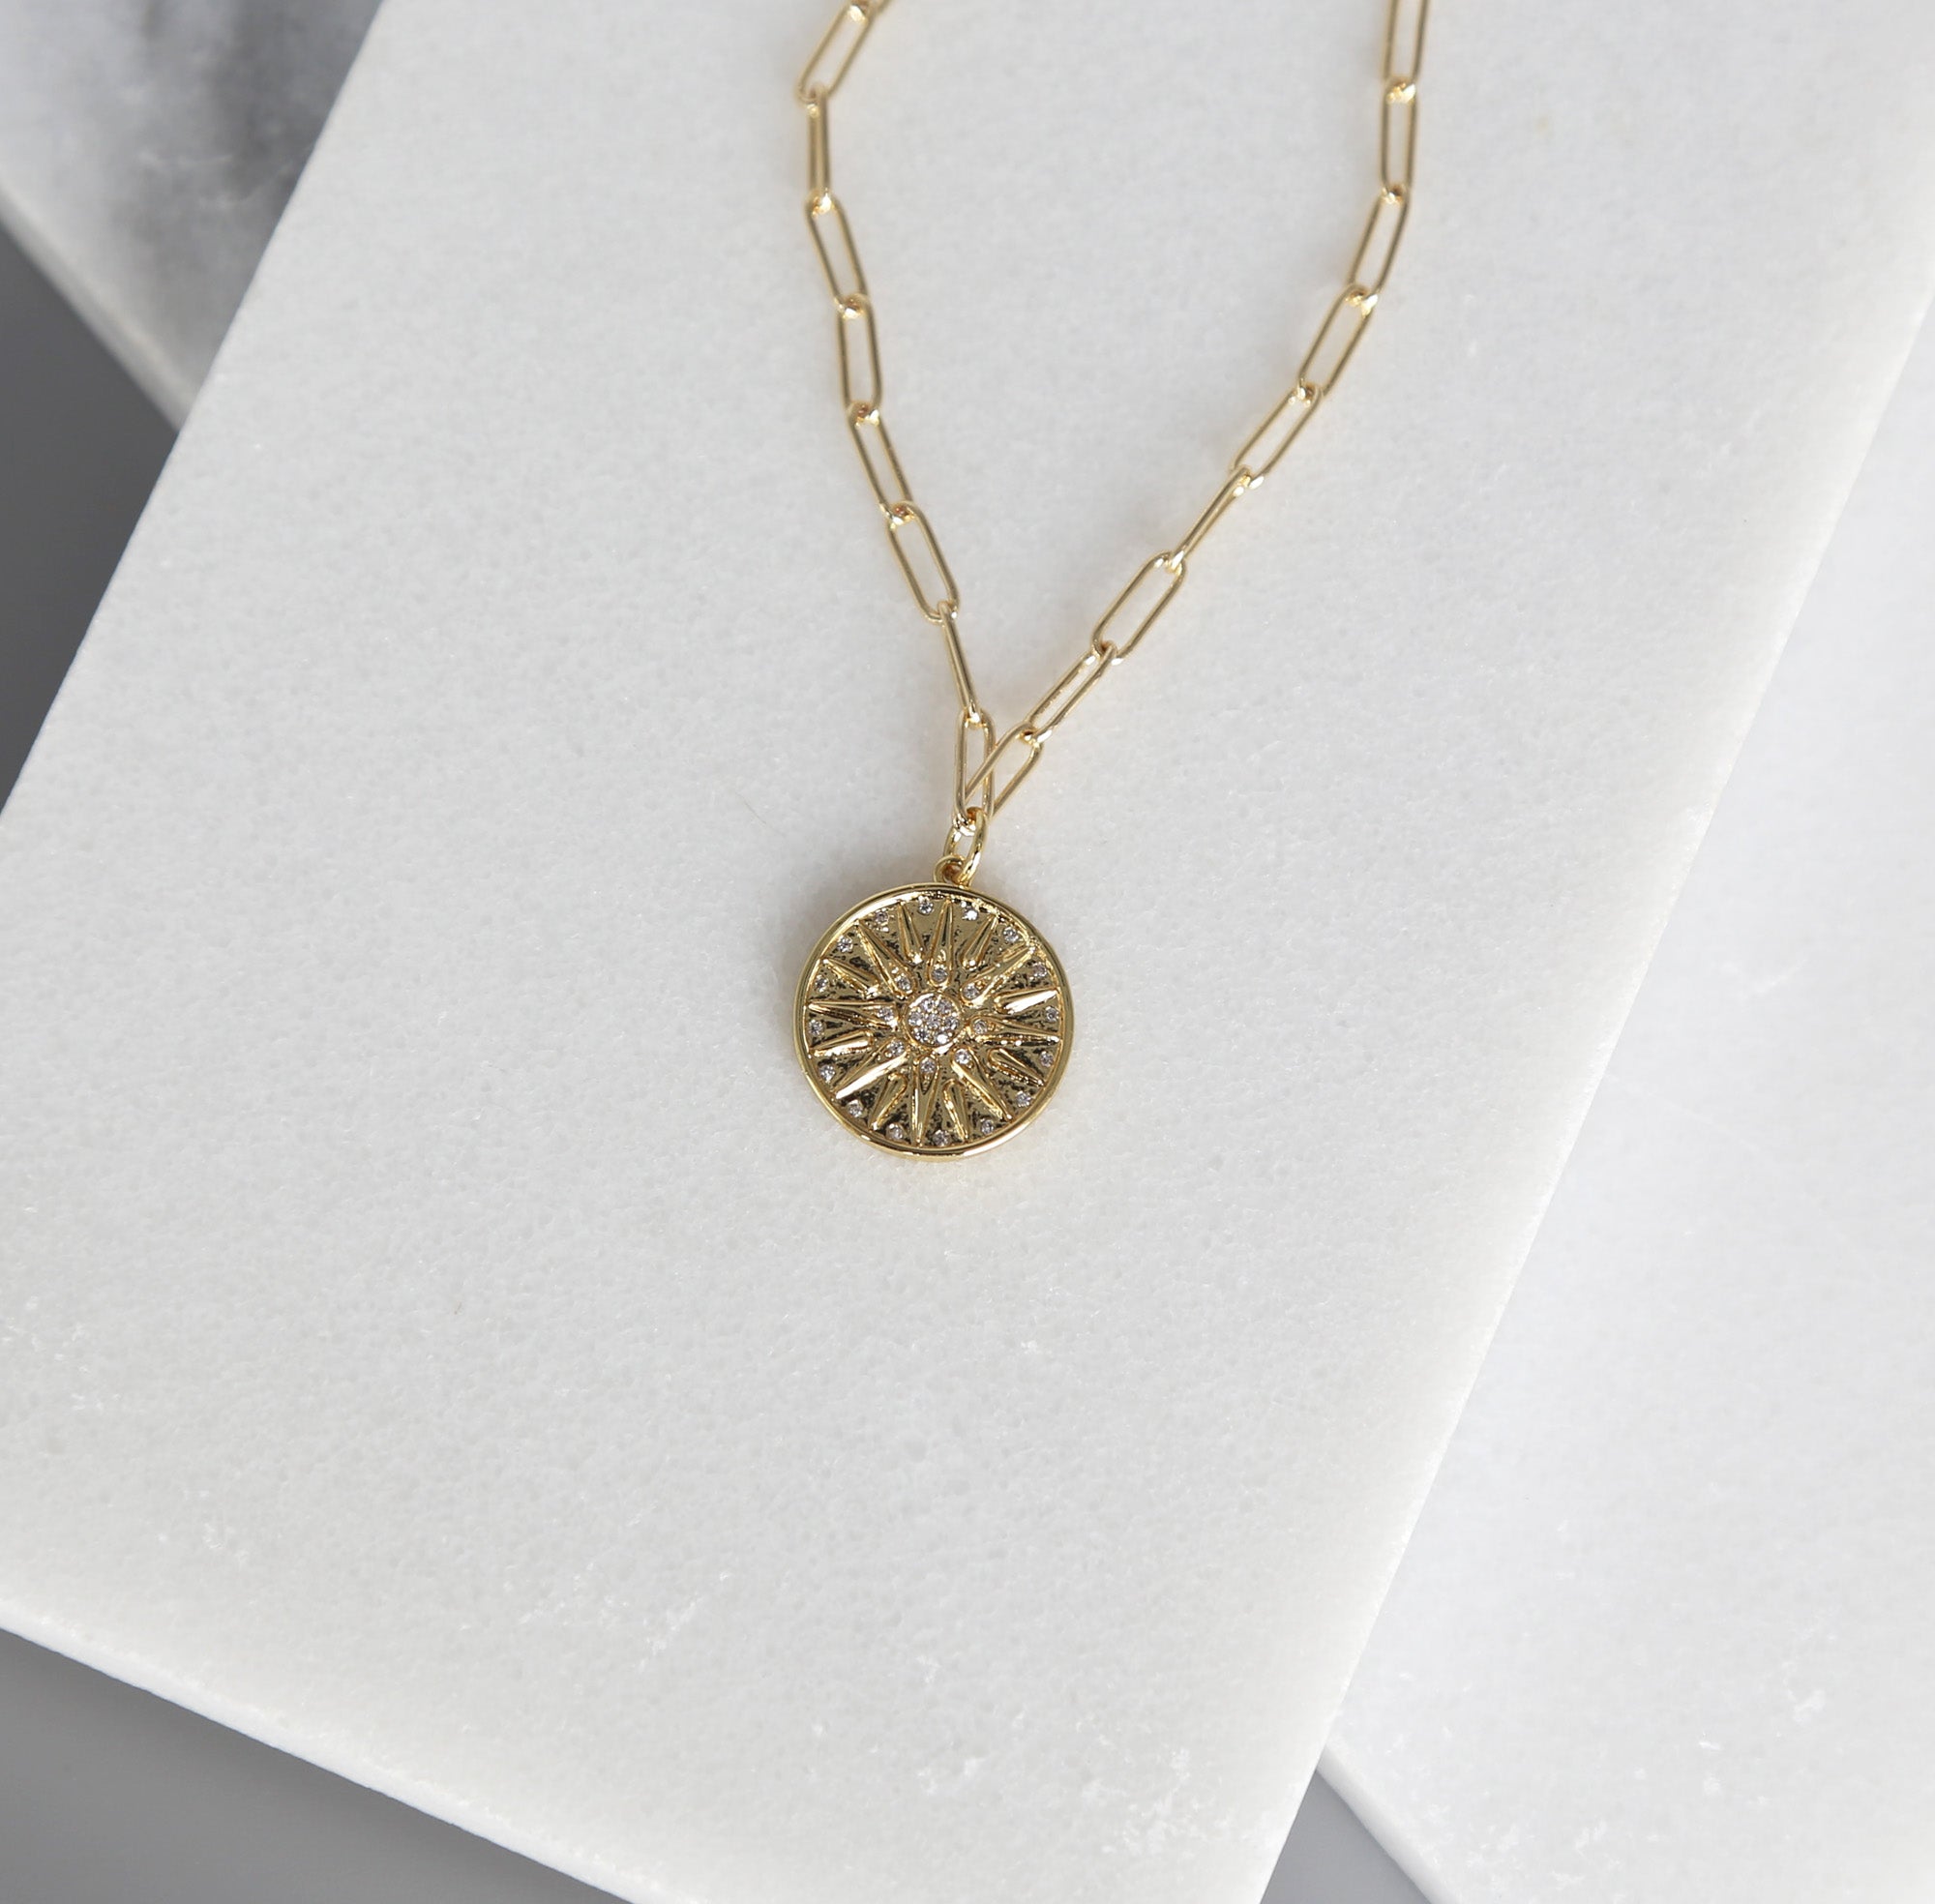 Bright Star and Sparkle Medallion Necklace, Gold Necklace, Pendant